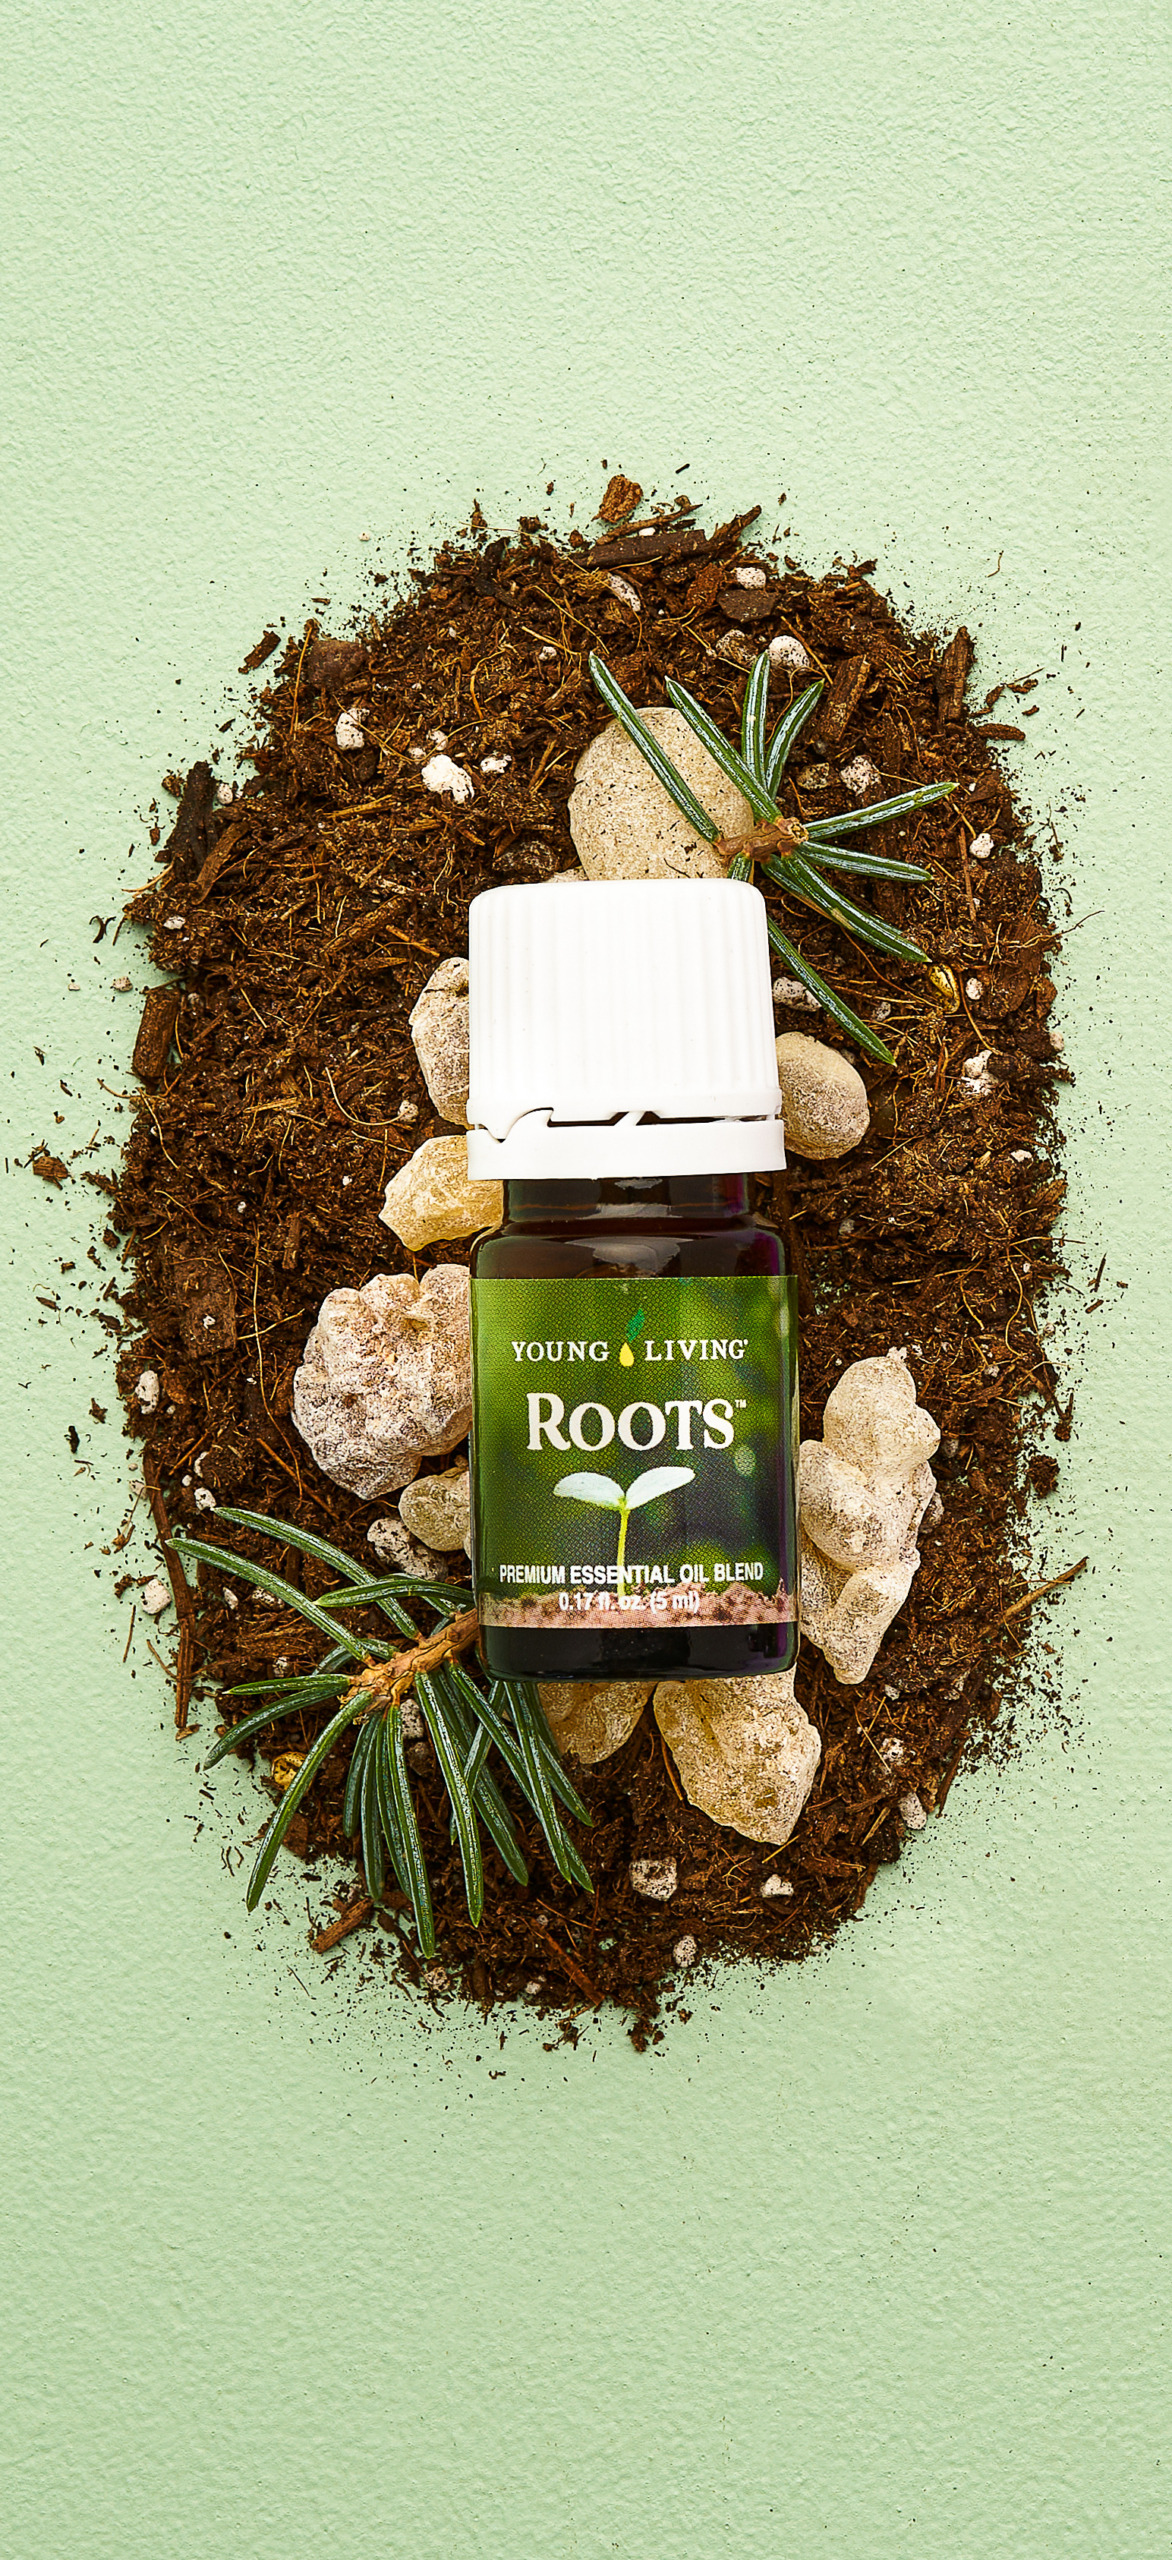 Roots Essential oil blend